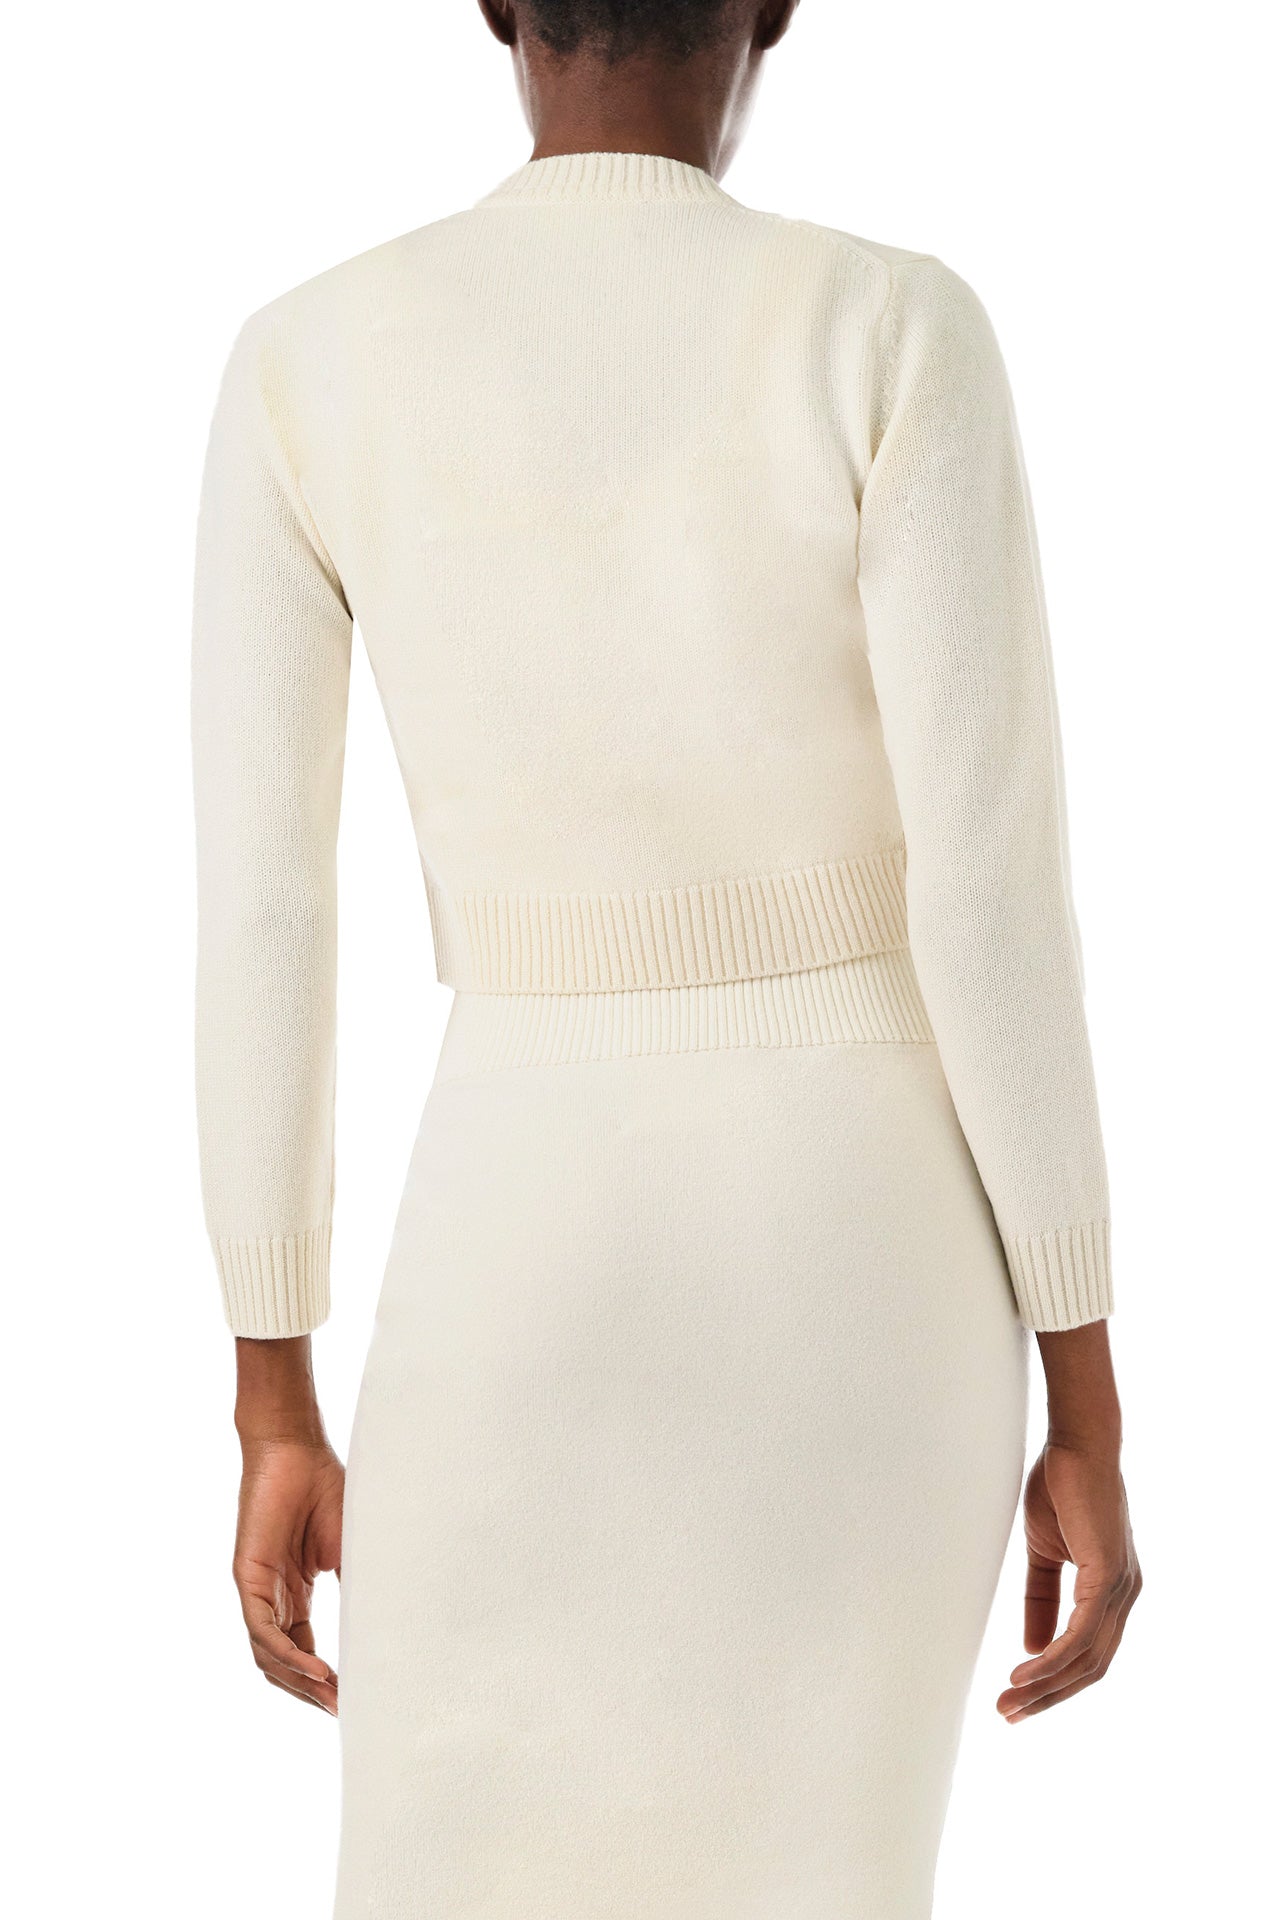 Monique Lhuillier Spring 2024 white knit cropped cardigan - back.